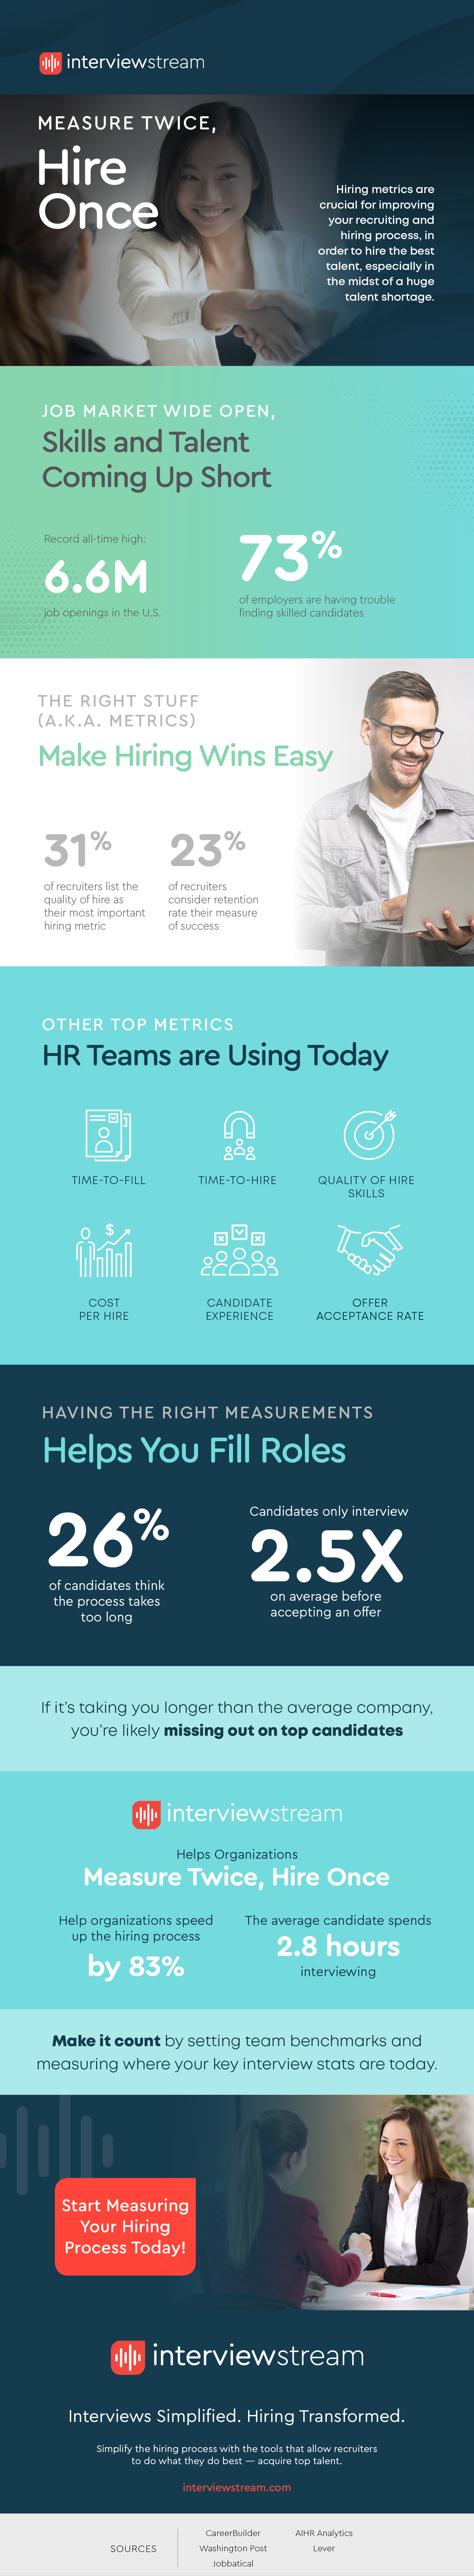 Infographic identifying the most important hiring metrics for talent acquisition teams